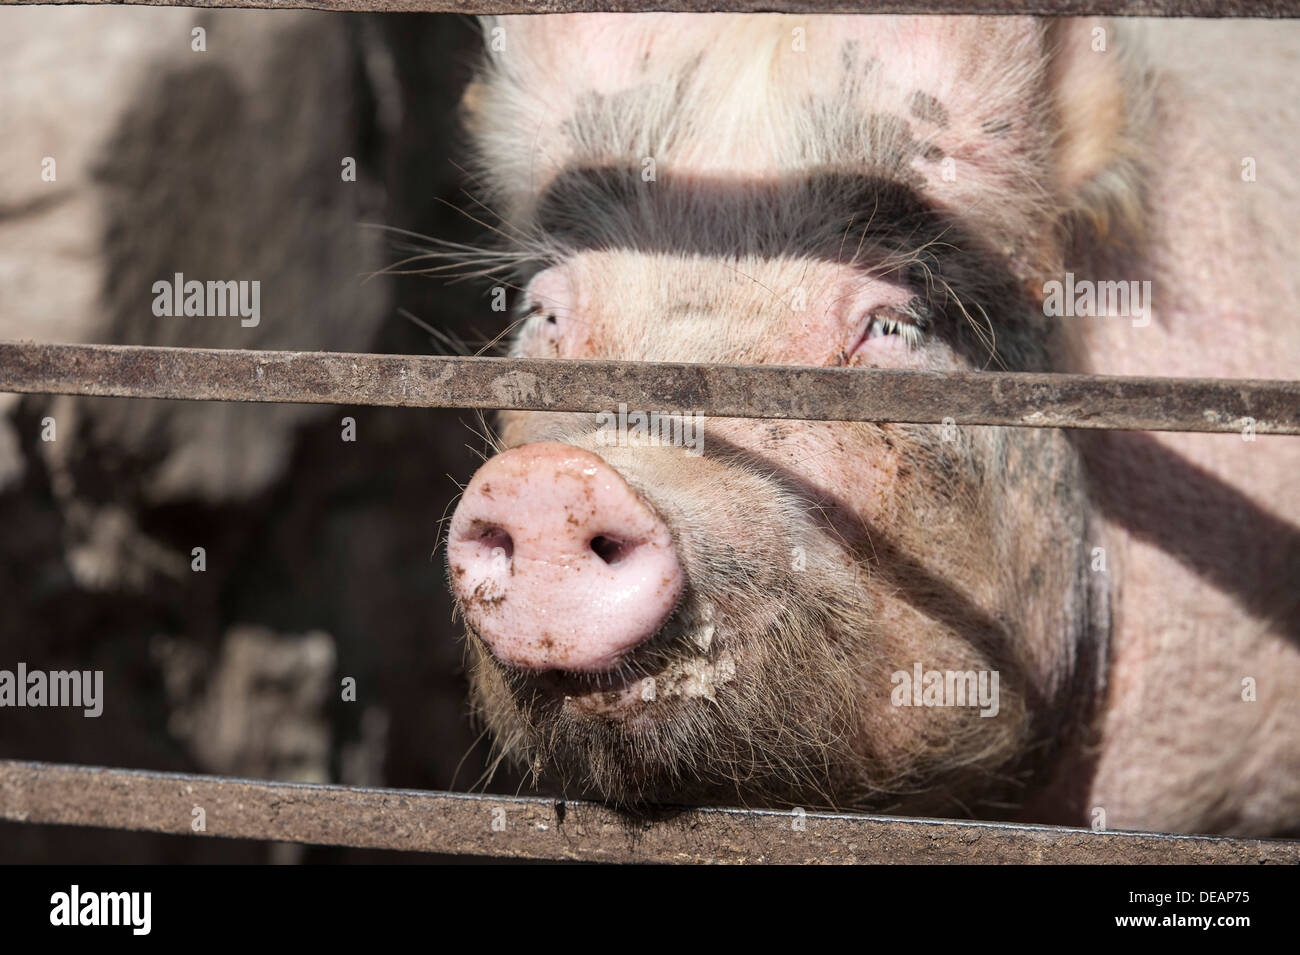 Snout of a domestic pig through a grate, Ireland, Europe Stock Photo